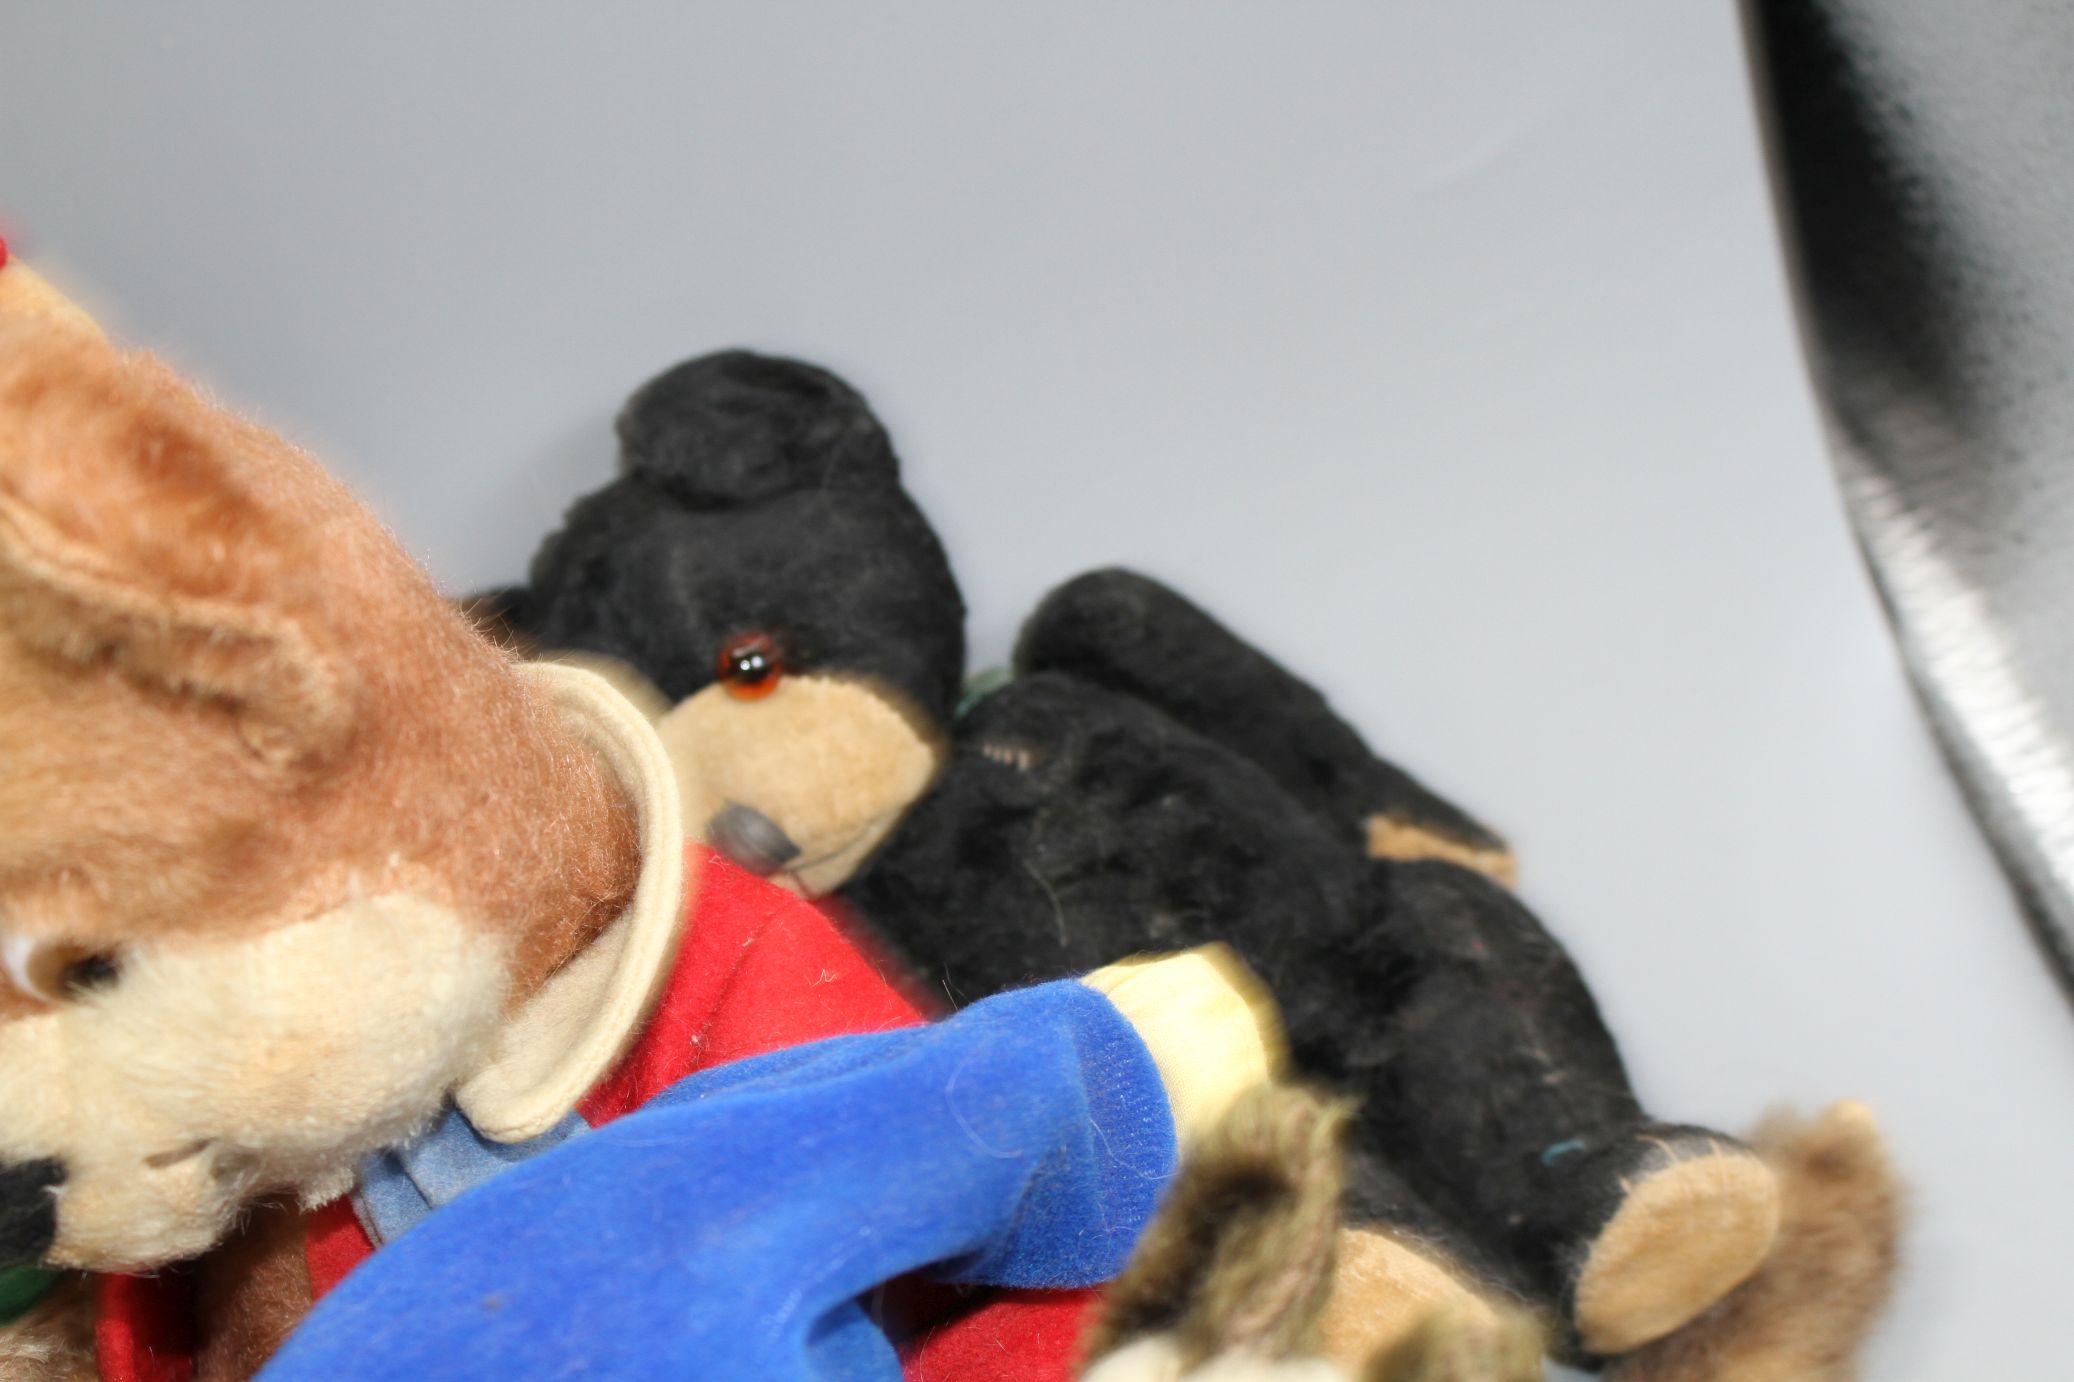 Noddy and Knoll bears, Merrythought Vintage Siamese cat, a Steiff monkey and Carobard character - Image 2 of 7